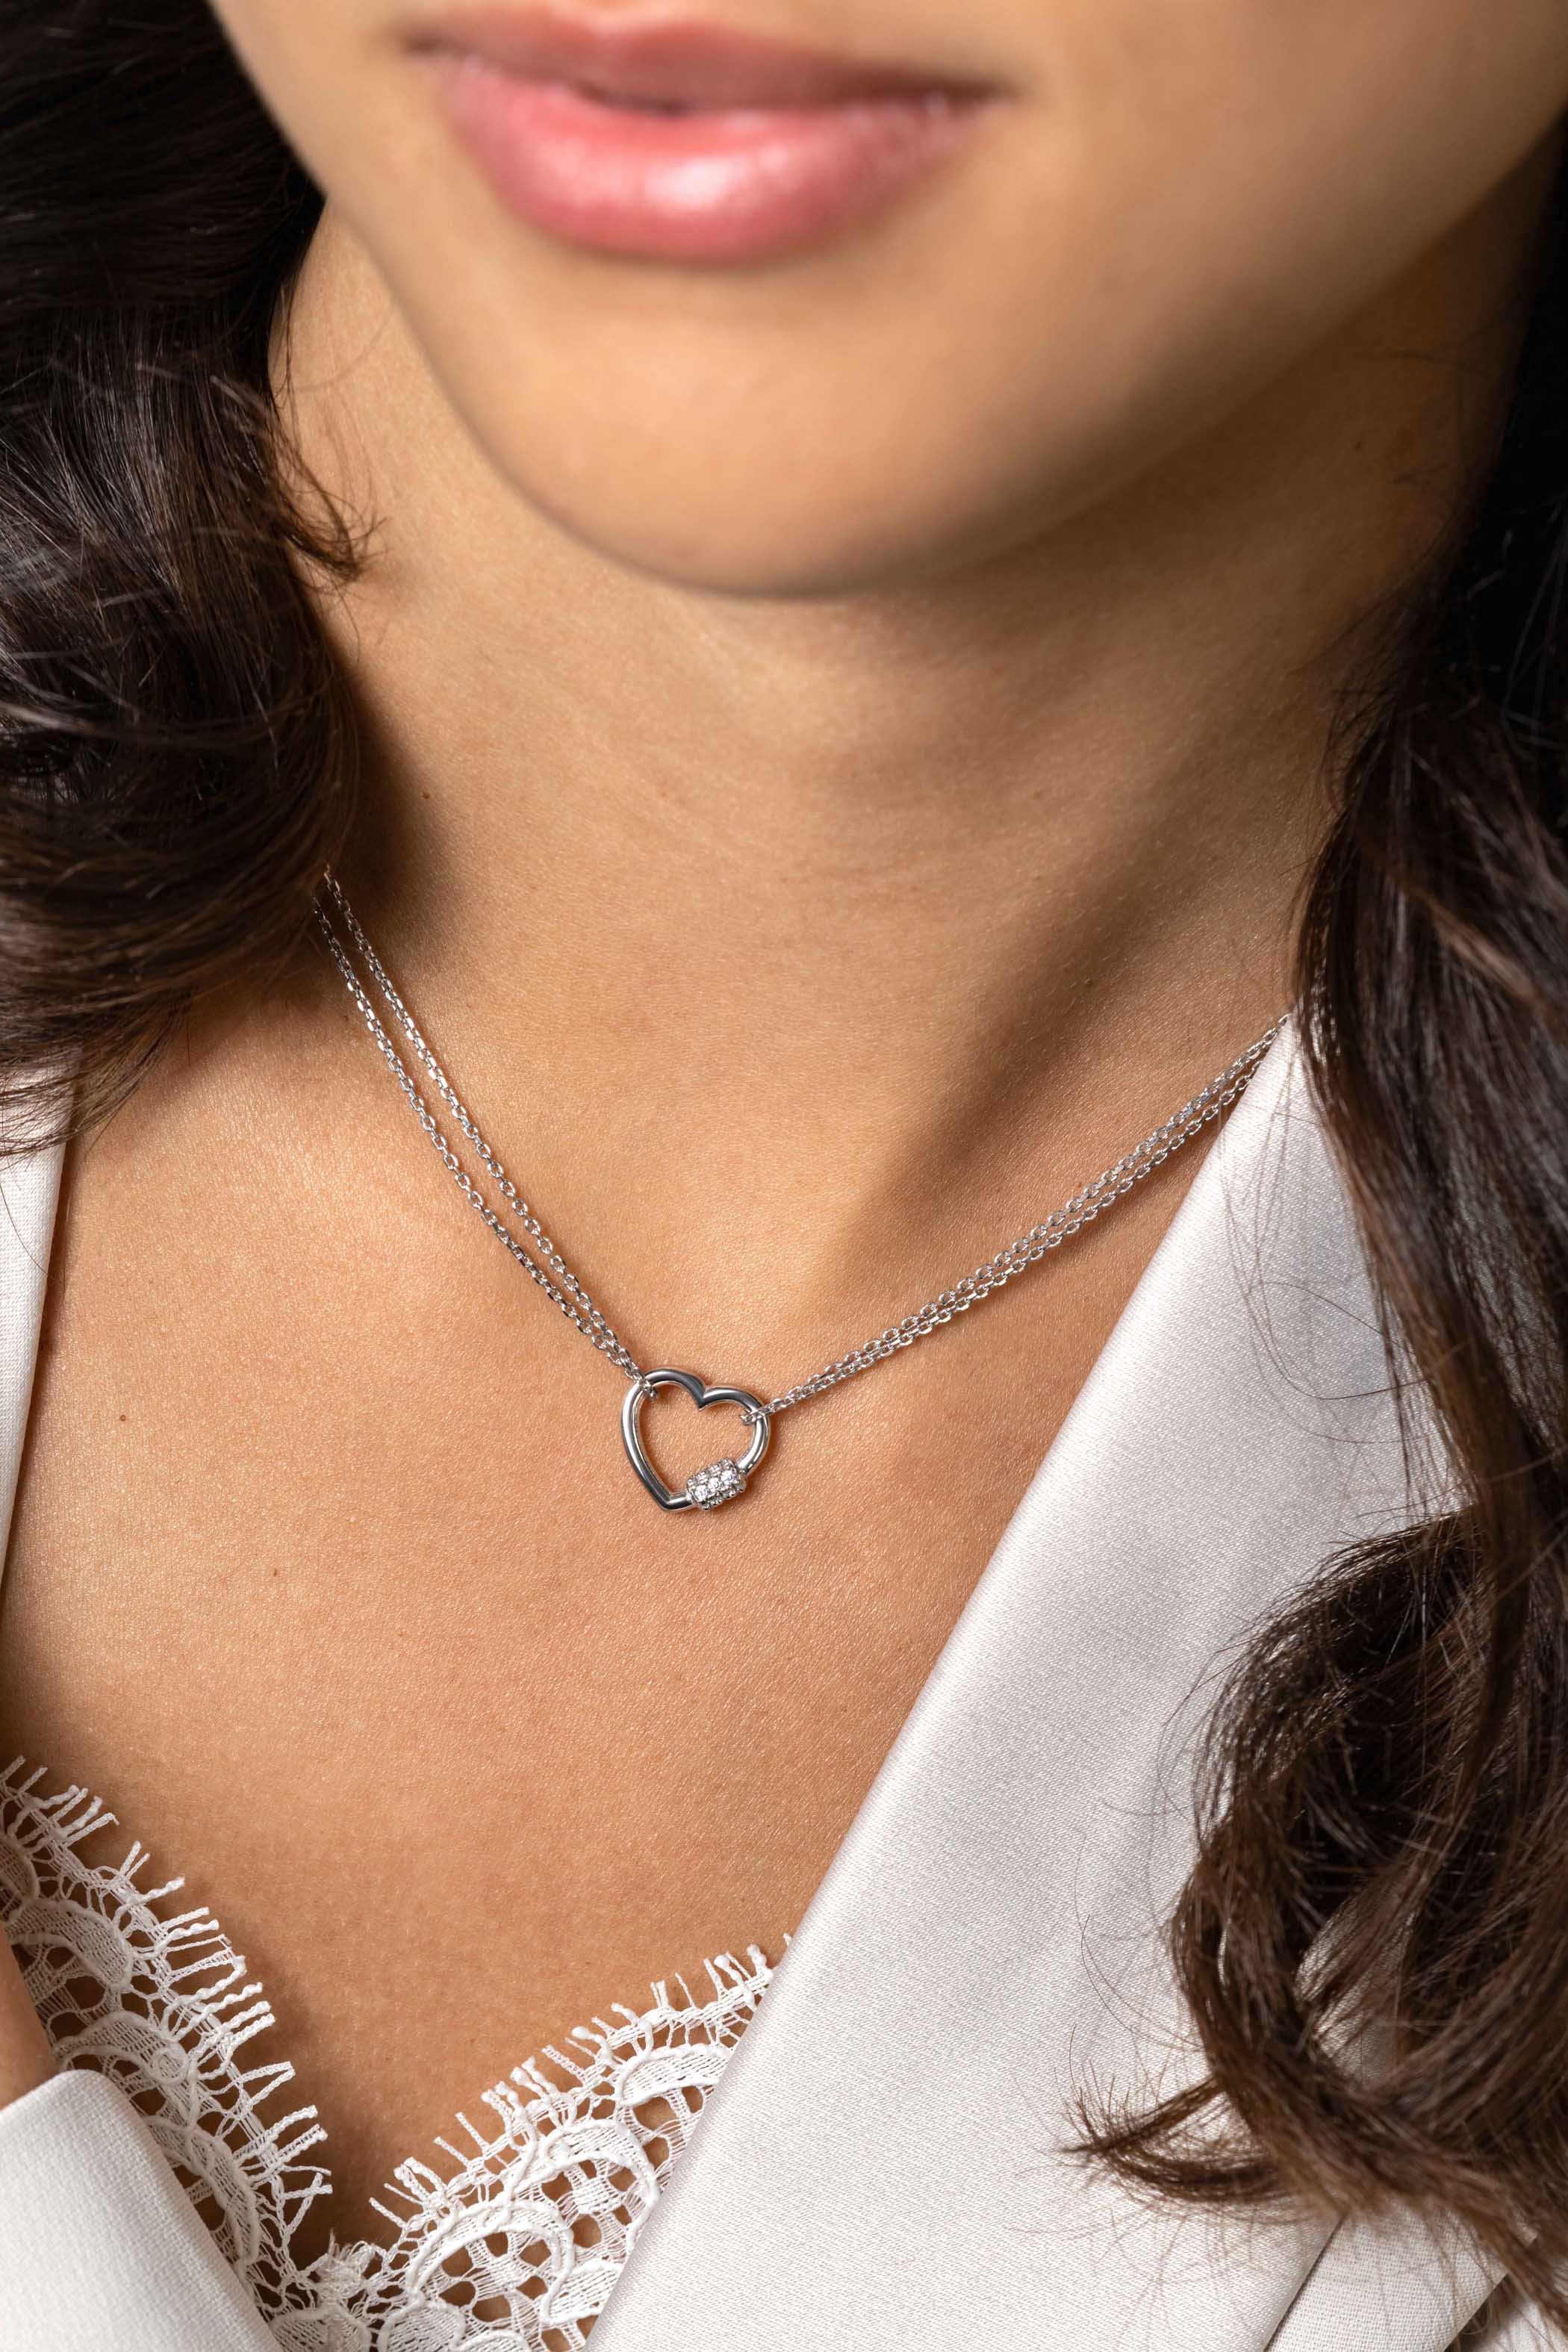 ZINZI Sterling Silver Necklace 45cm with a Luxurious Heart Pendant (14mm) amd White Zirconias 40-45cm ZIC2507